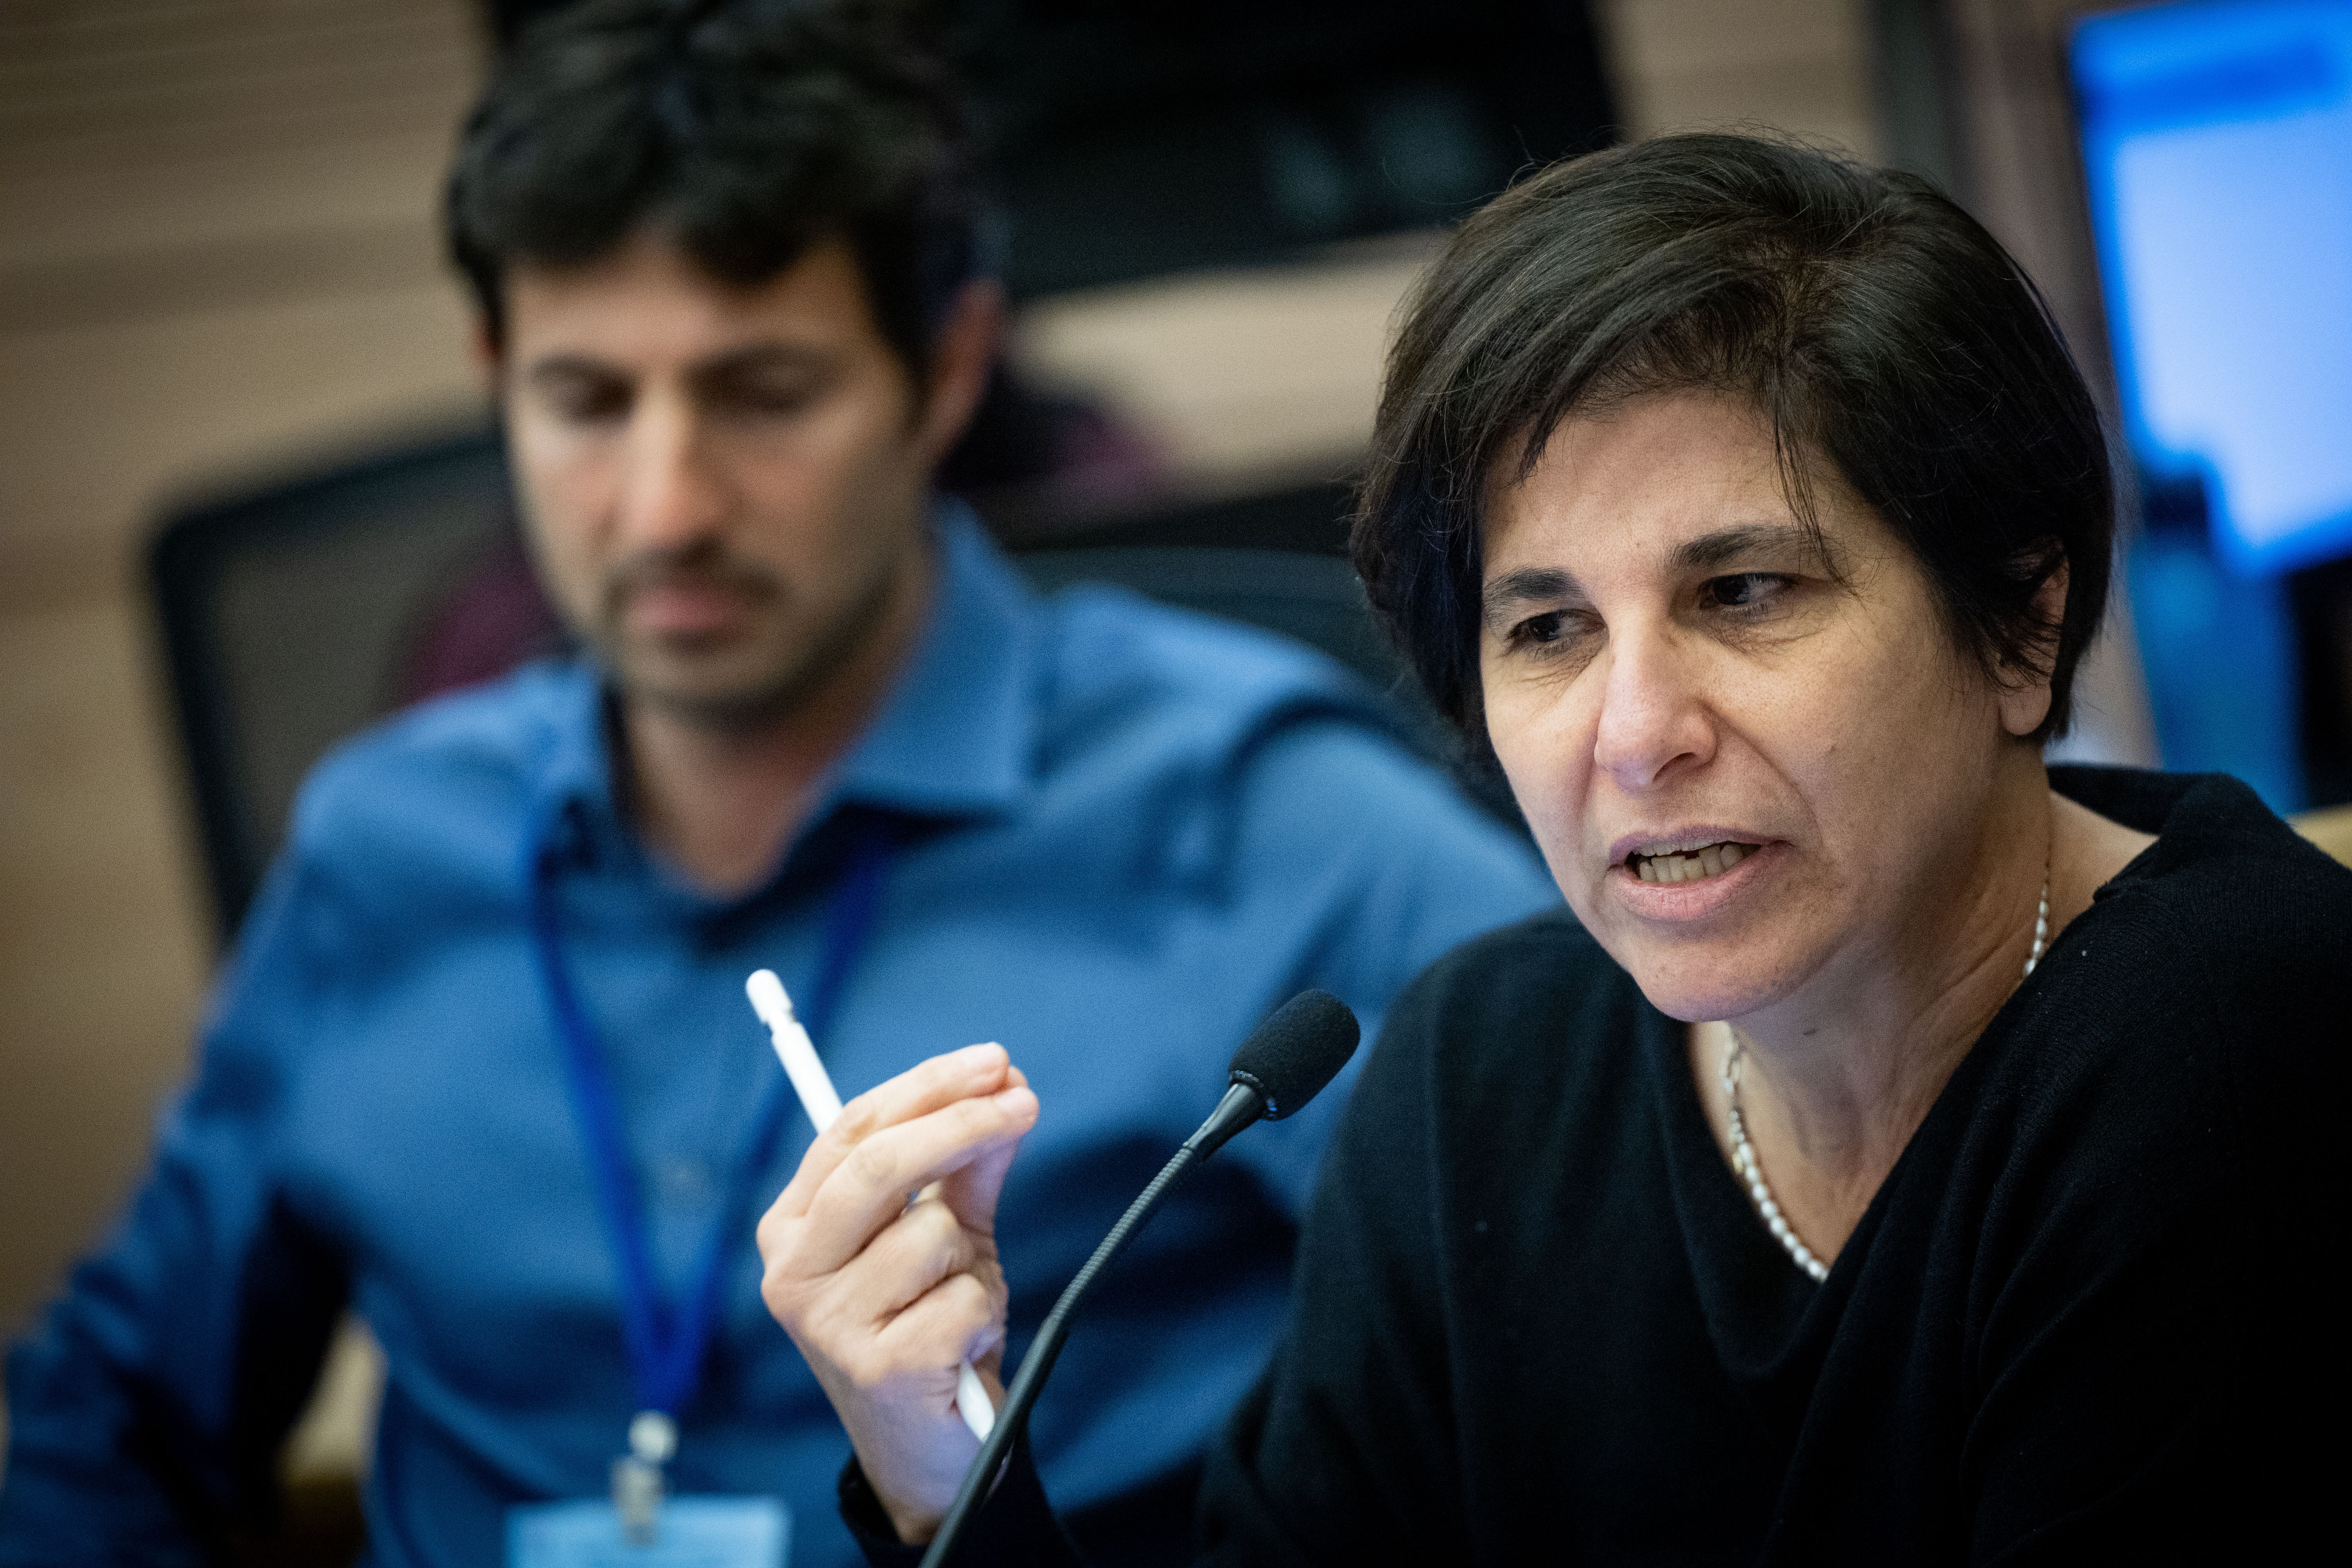 The Inexcusable Absence of Women in Israeli Ministry Leadership Roles